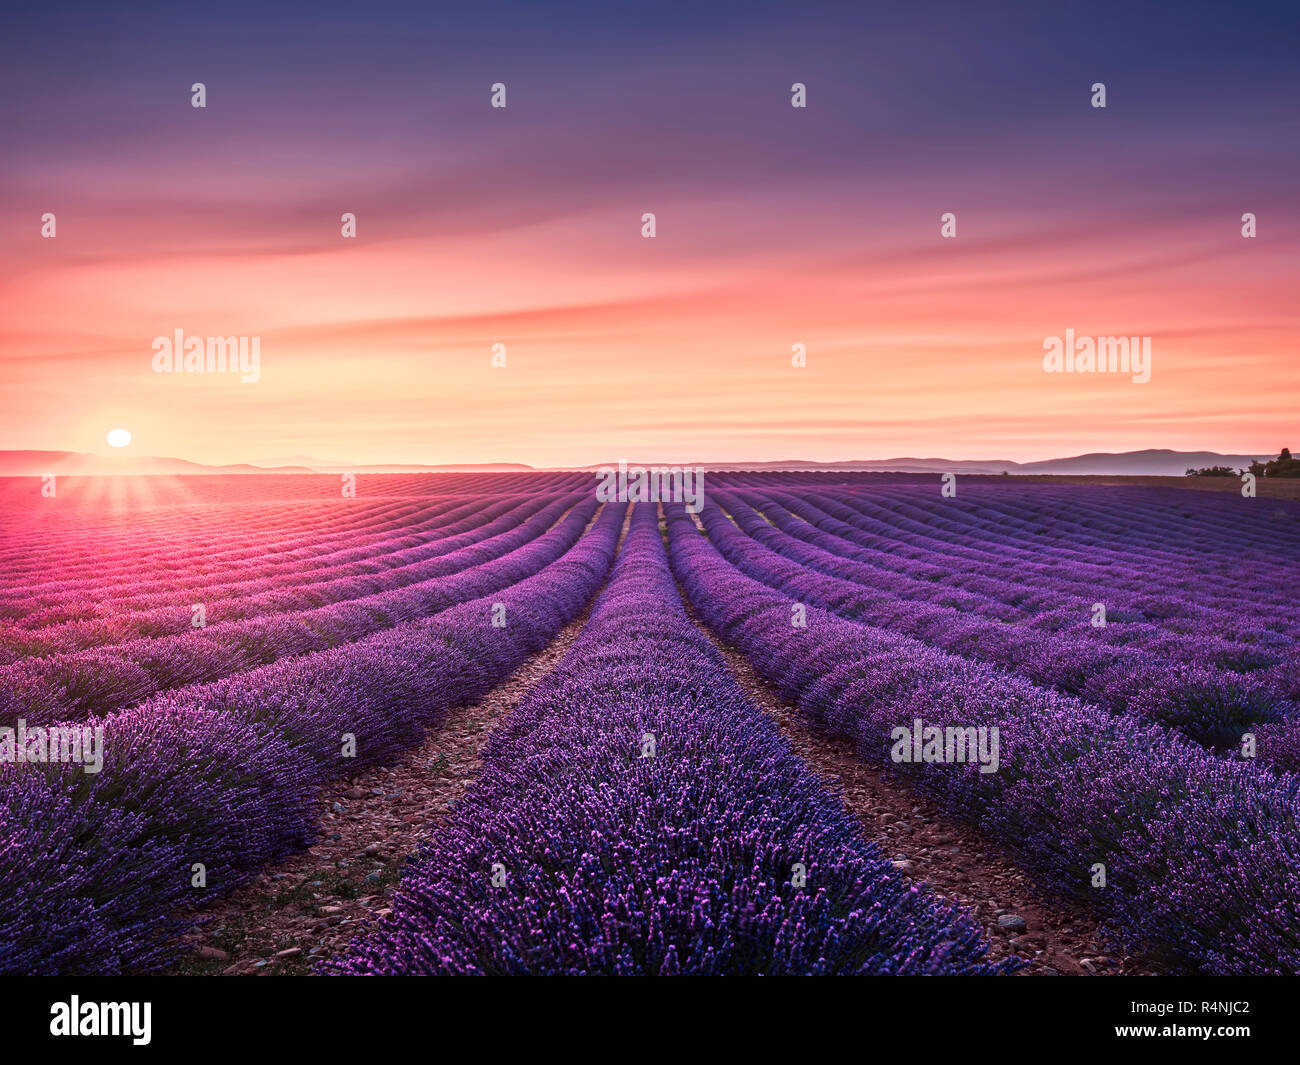 Lavender flower blooming scented fields in endless rows at sunset. Valensole plateau, provence, france, europe. Stock Photo